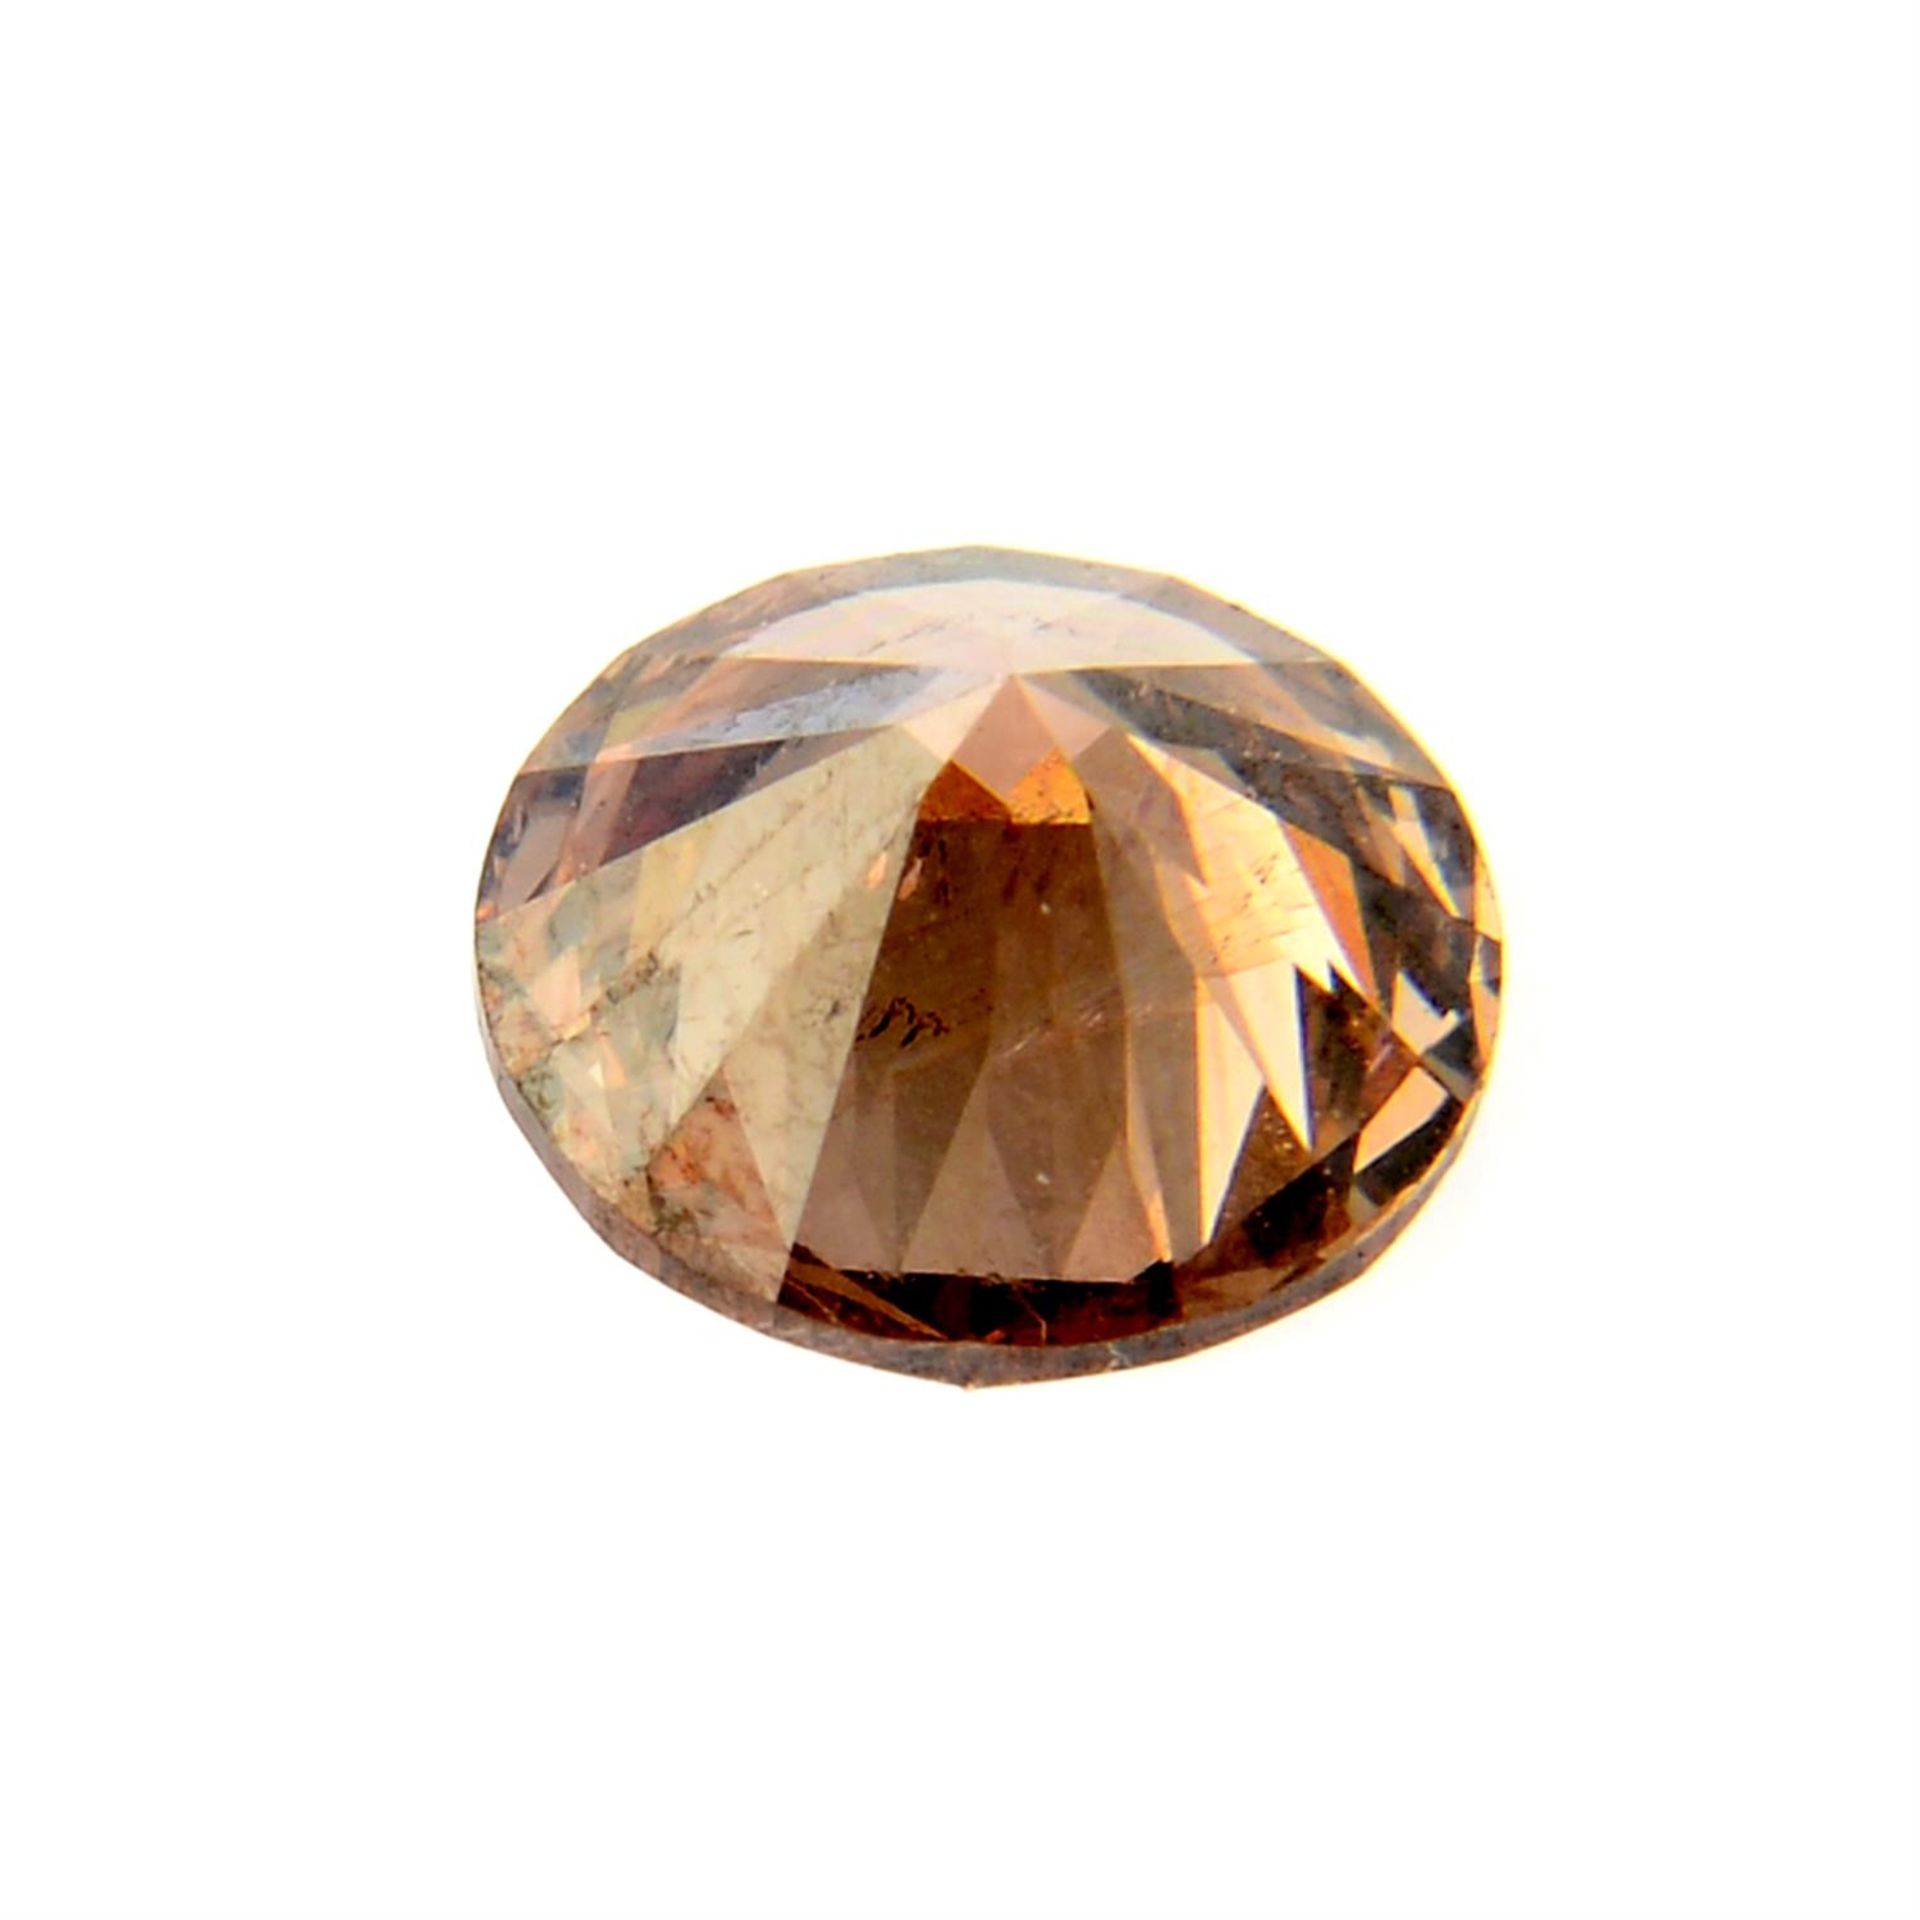 A brilliant cut 'brown' diamond, weighing 1ct. Estimated to be 'brown' colour and SI2 clarity. - Image 2 of 2